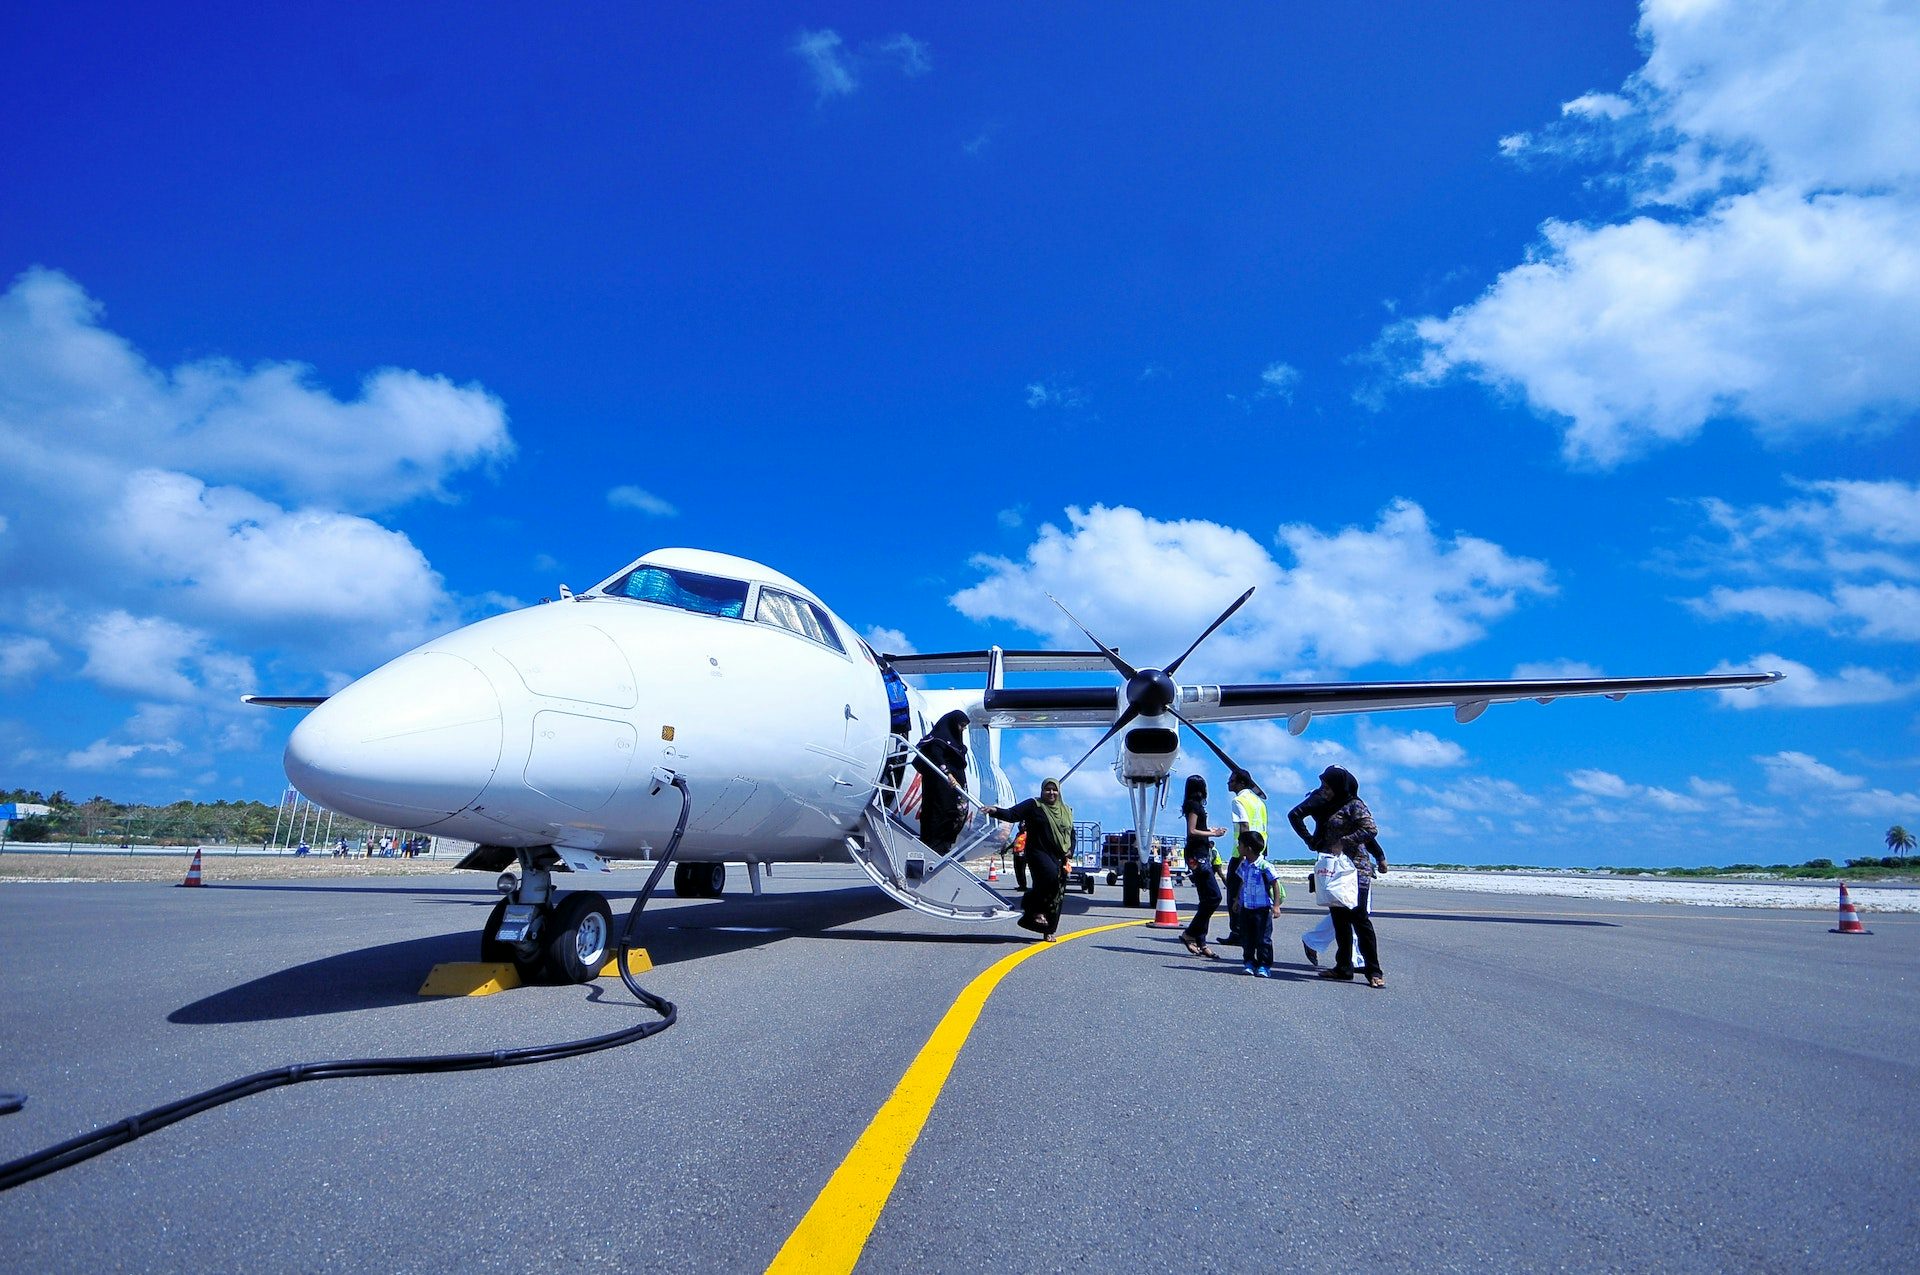 Five Easy Steps to Take to Charter a Private Aircraft